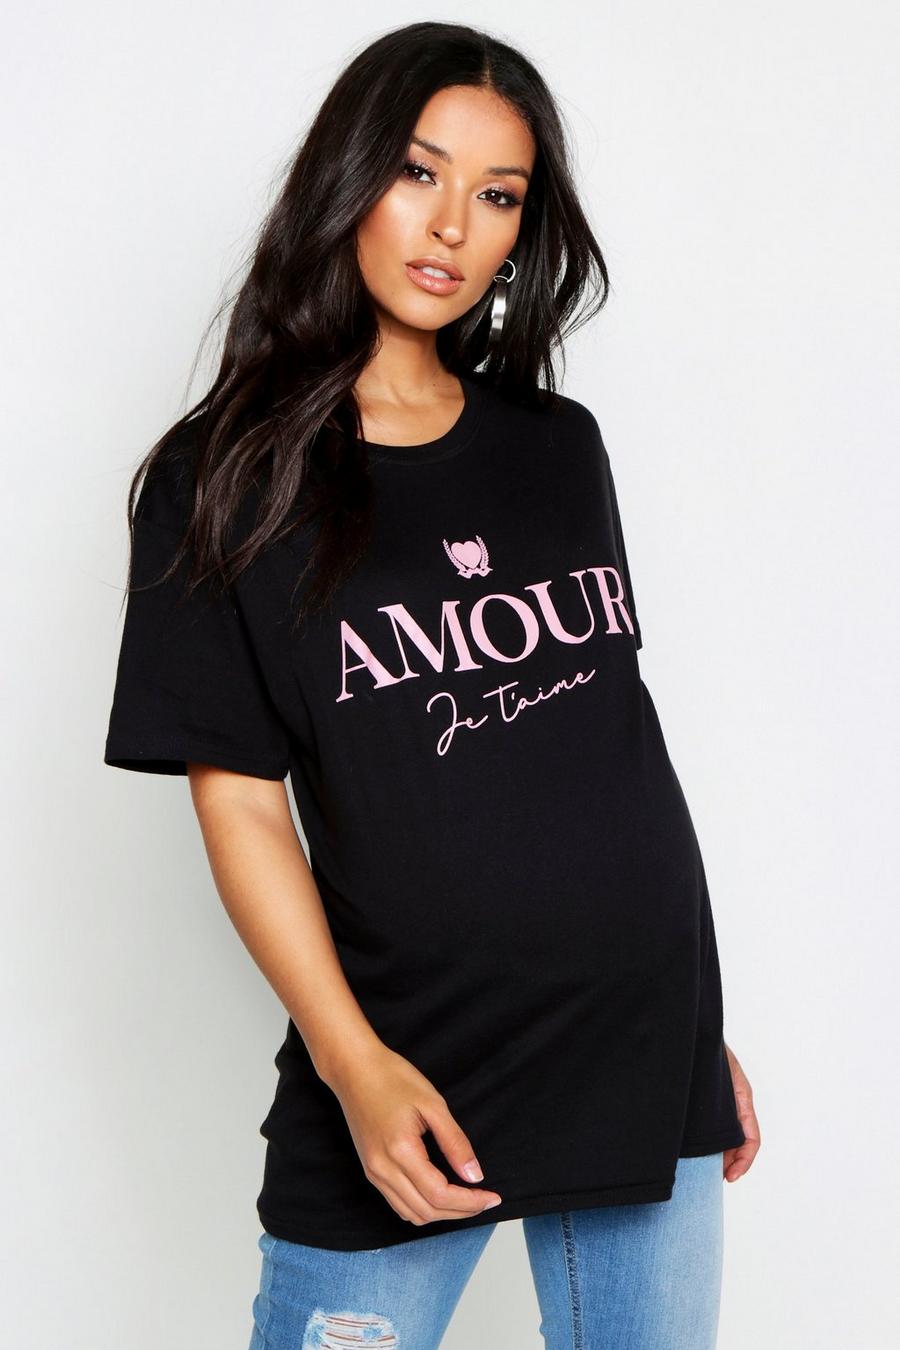 T-shirt premaman con scritta "Amour" image number 1